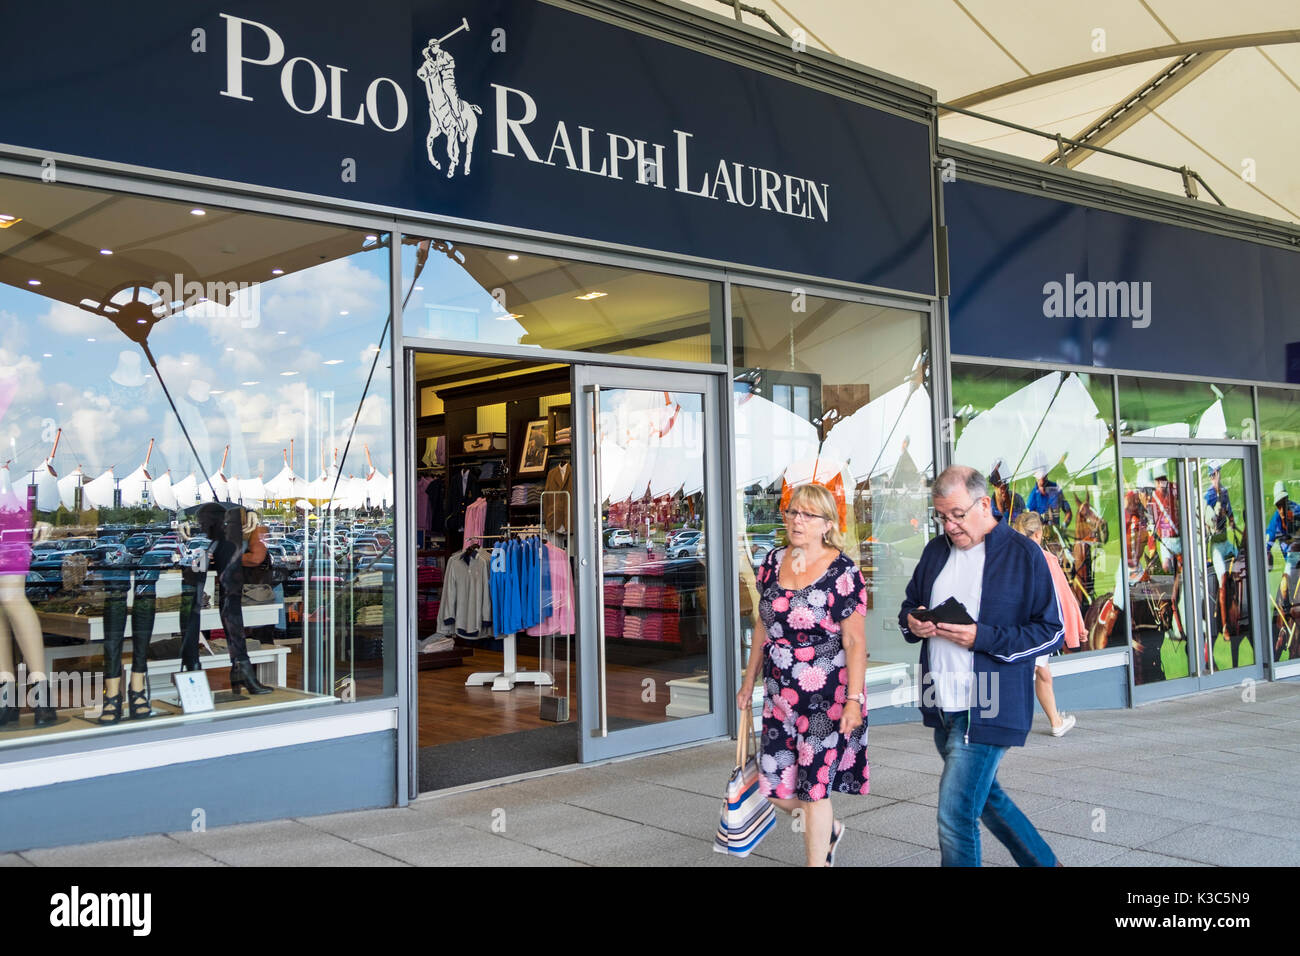 At the Polo Ralph Lauren Outlet Store - Picture of Tanger Outlets